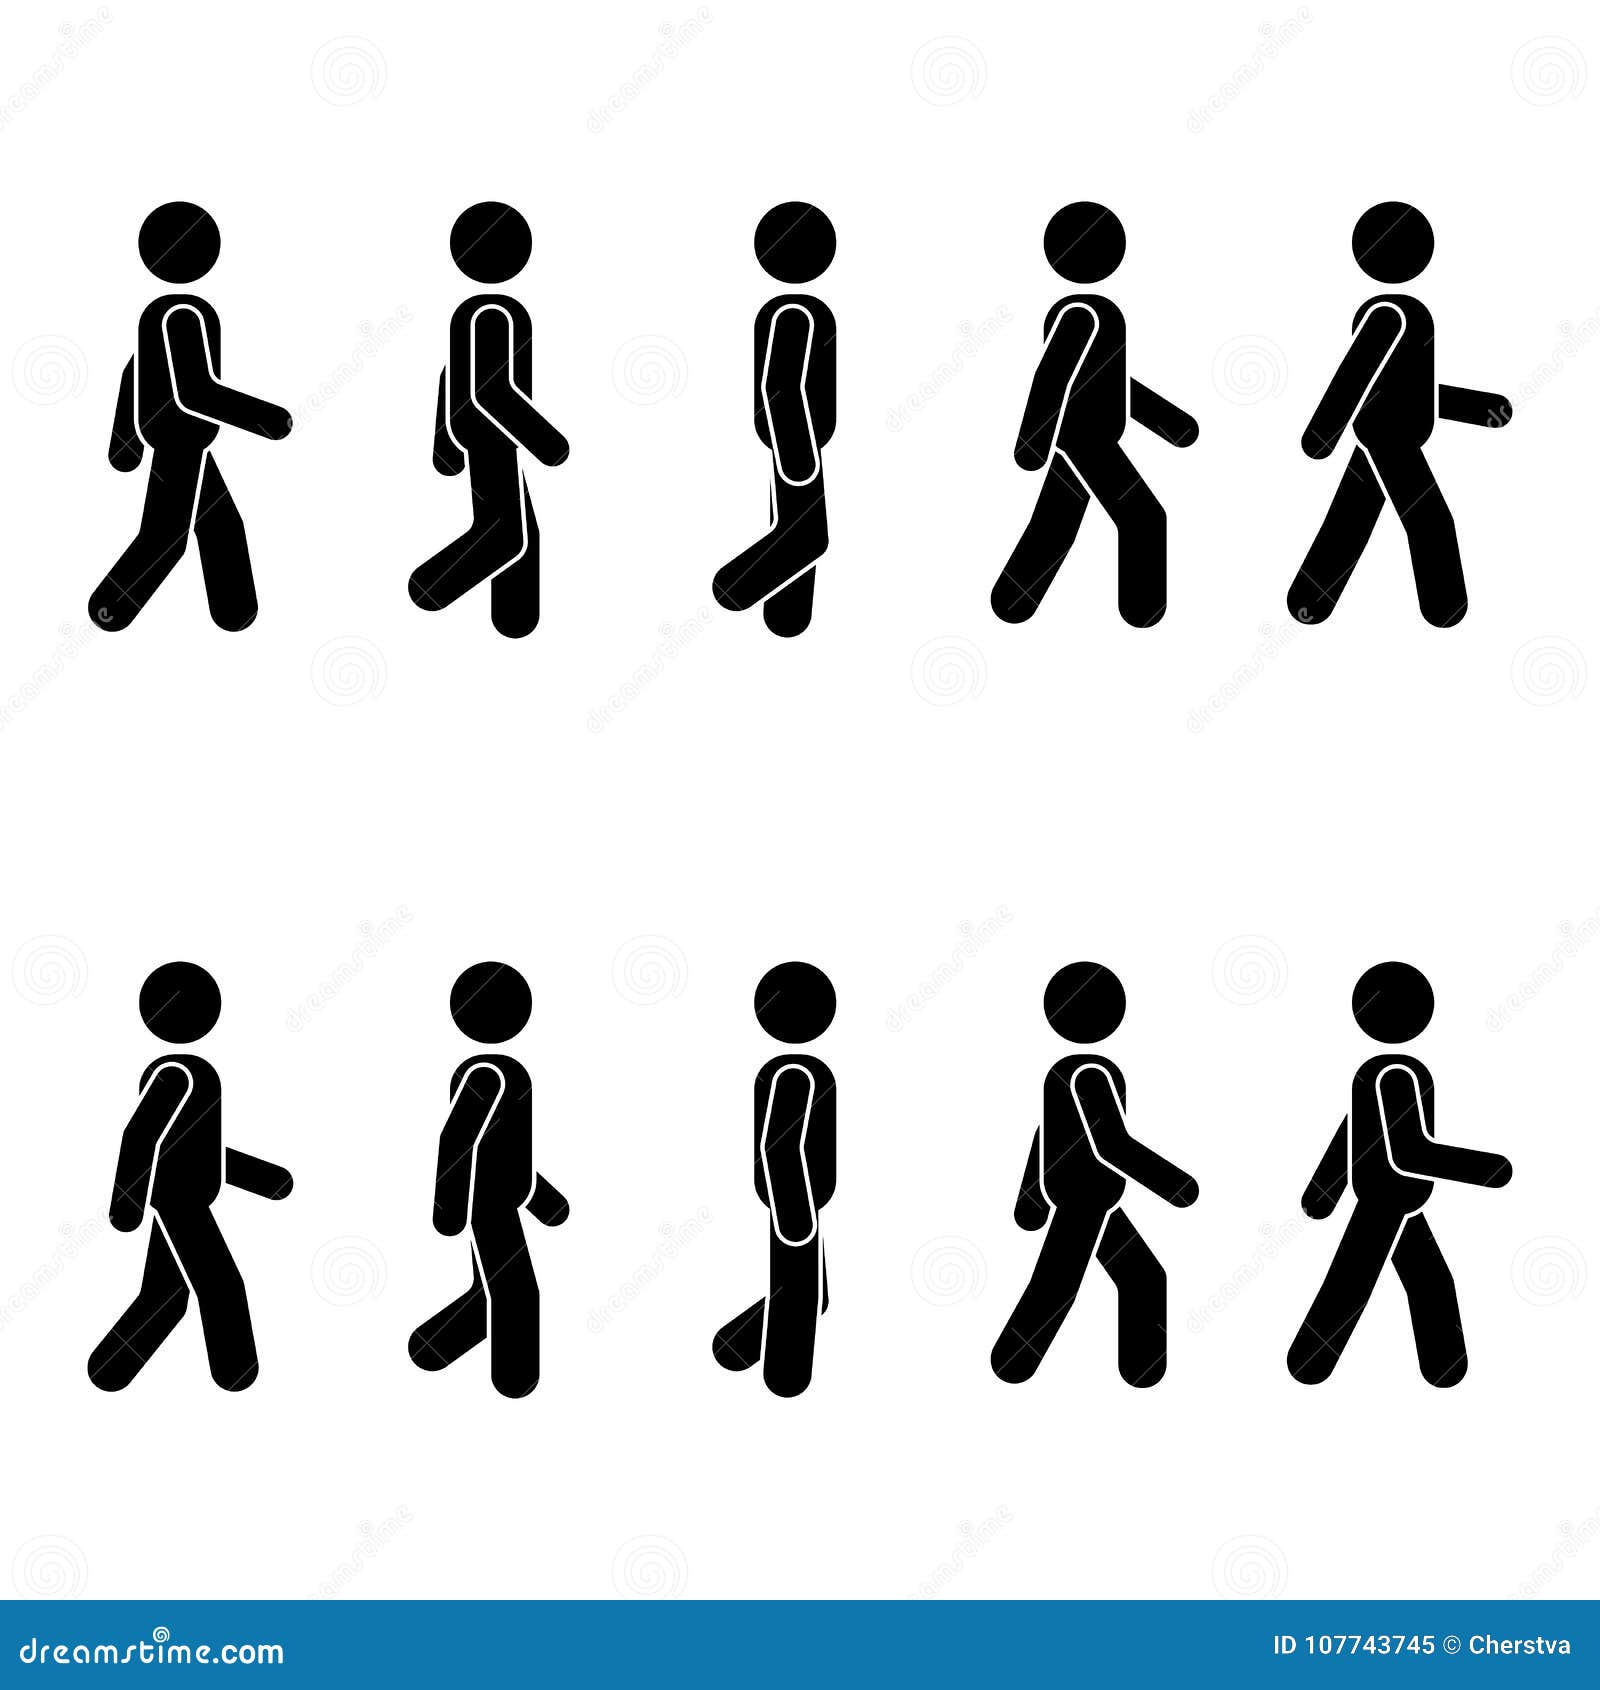 man people various walking position. posture stick figure.  standing person icon  sign pictogram on white.